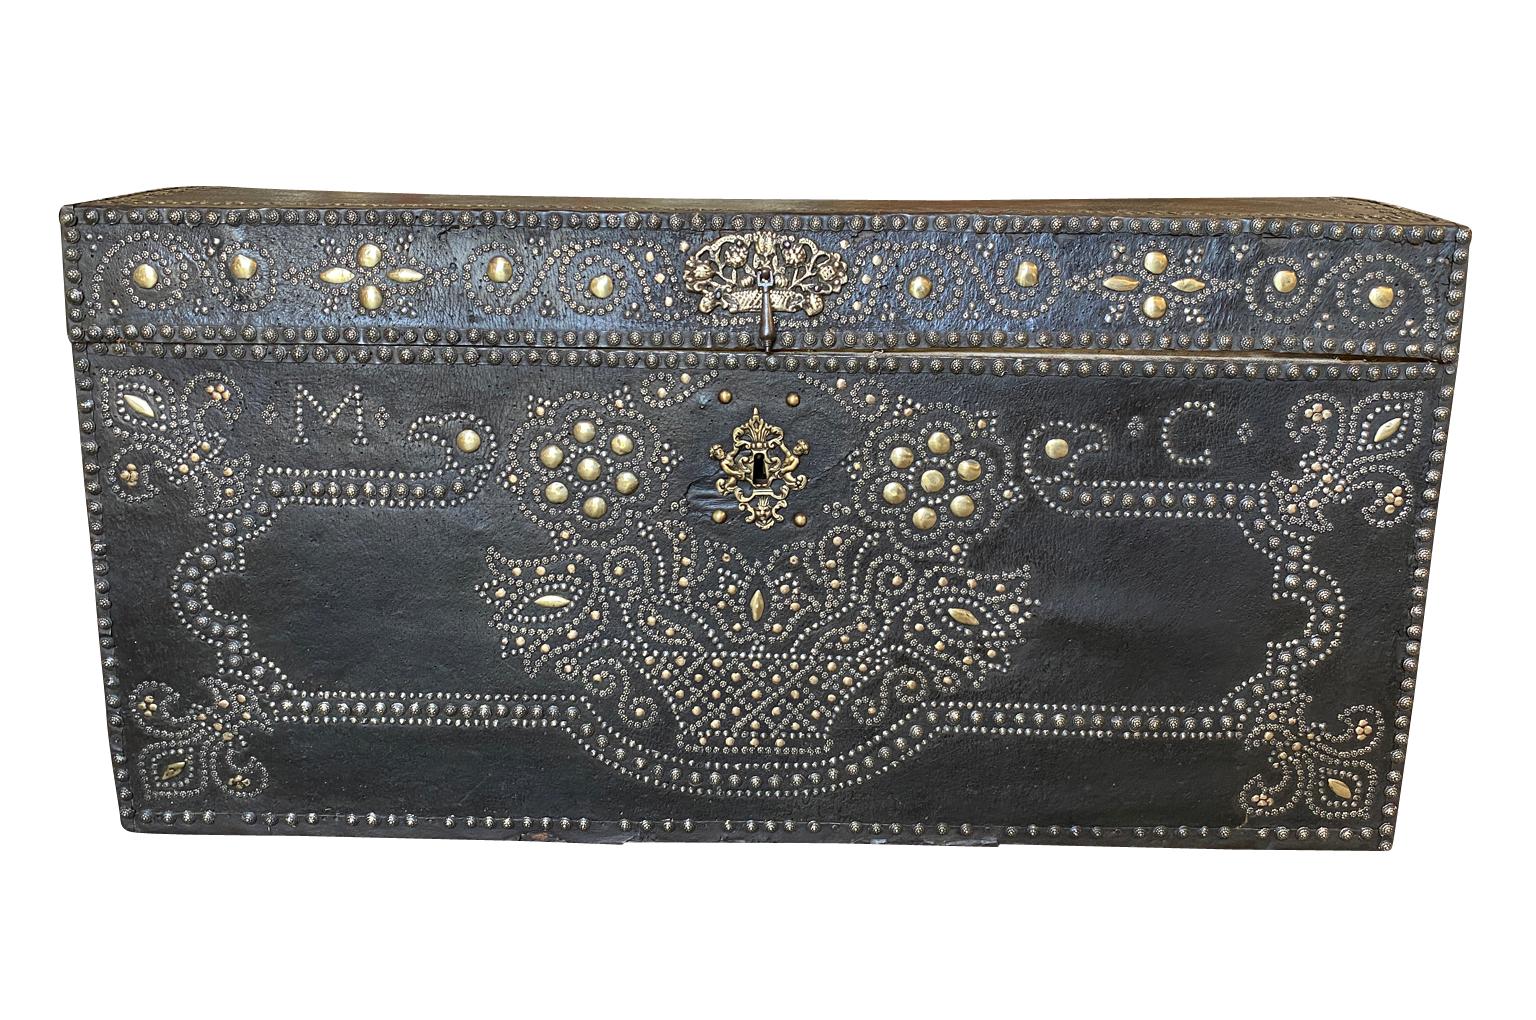 An exceptional 17th century Marriage Trunk - Malle - from the Provence region of France. Soundly constructed from wood and clad in leather. Beautifully decorated with bronze nail heads in the form of petite flowers forming a bouquet of flowers,